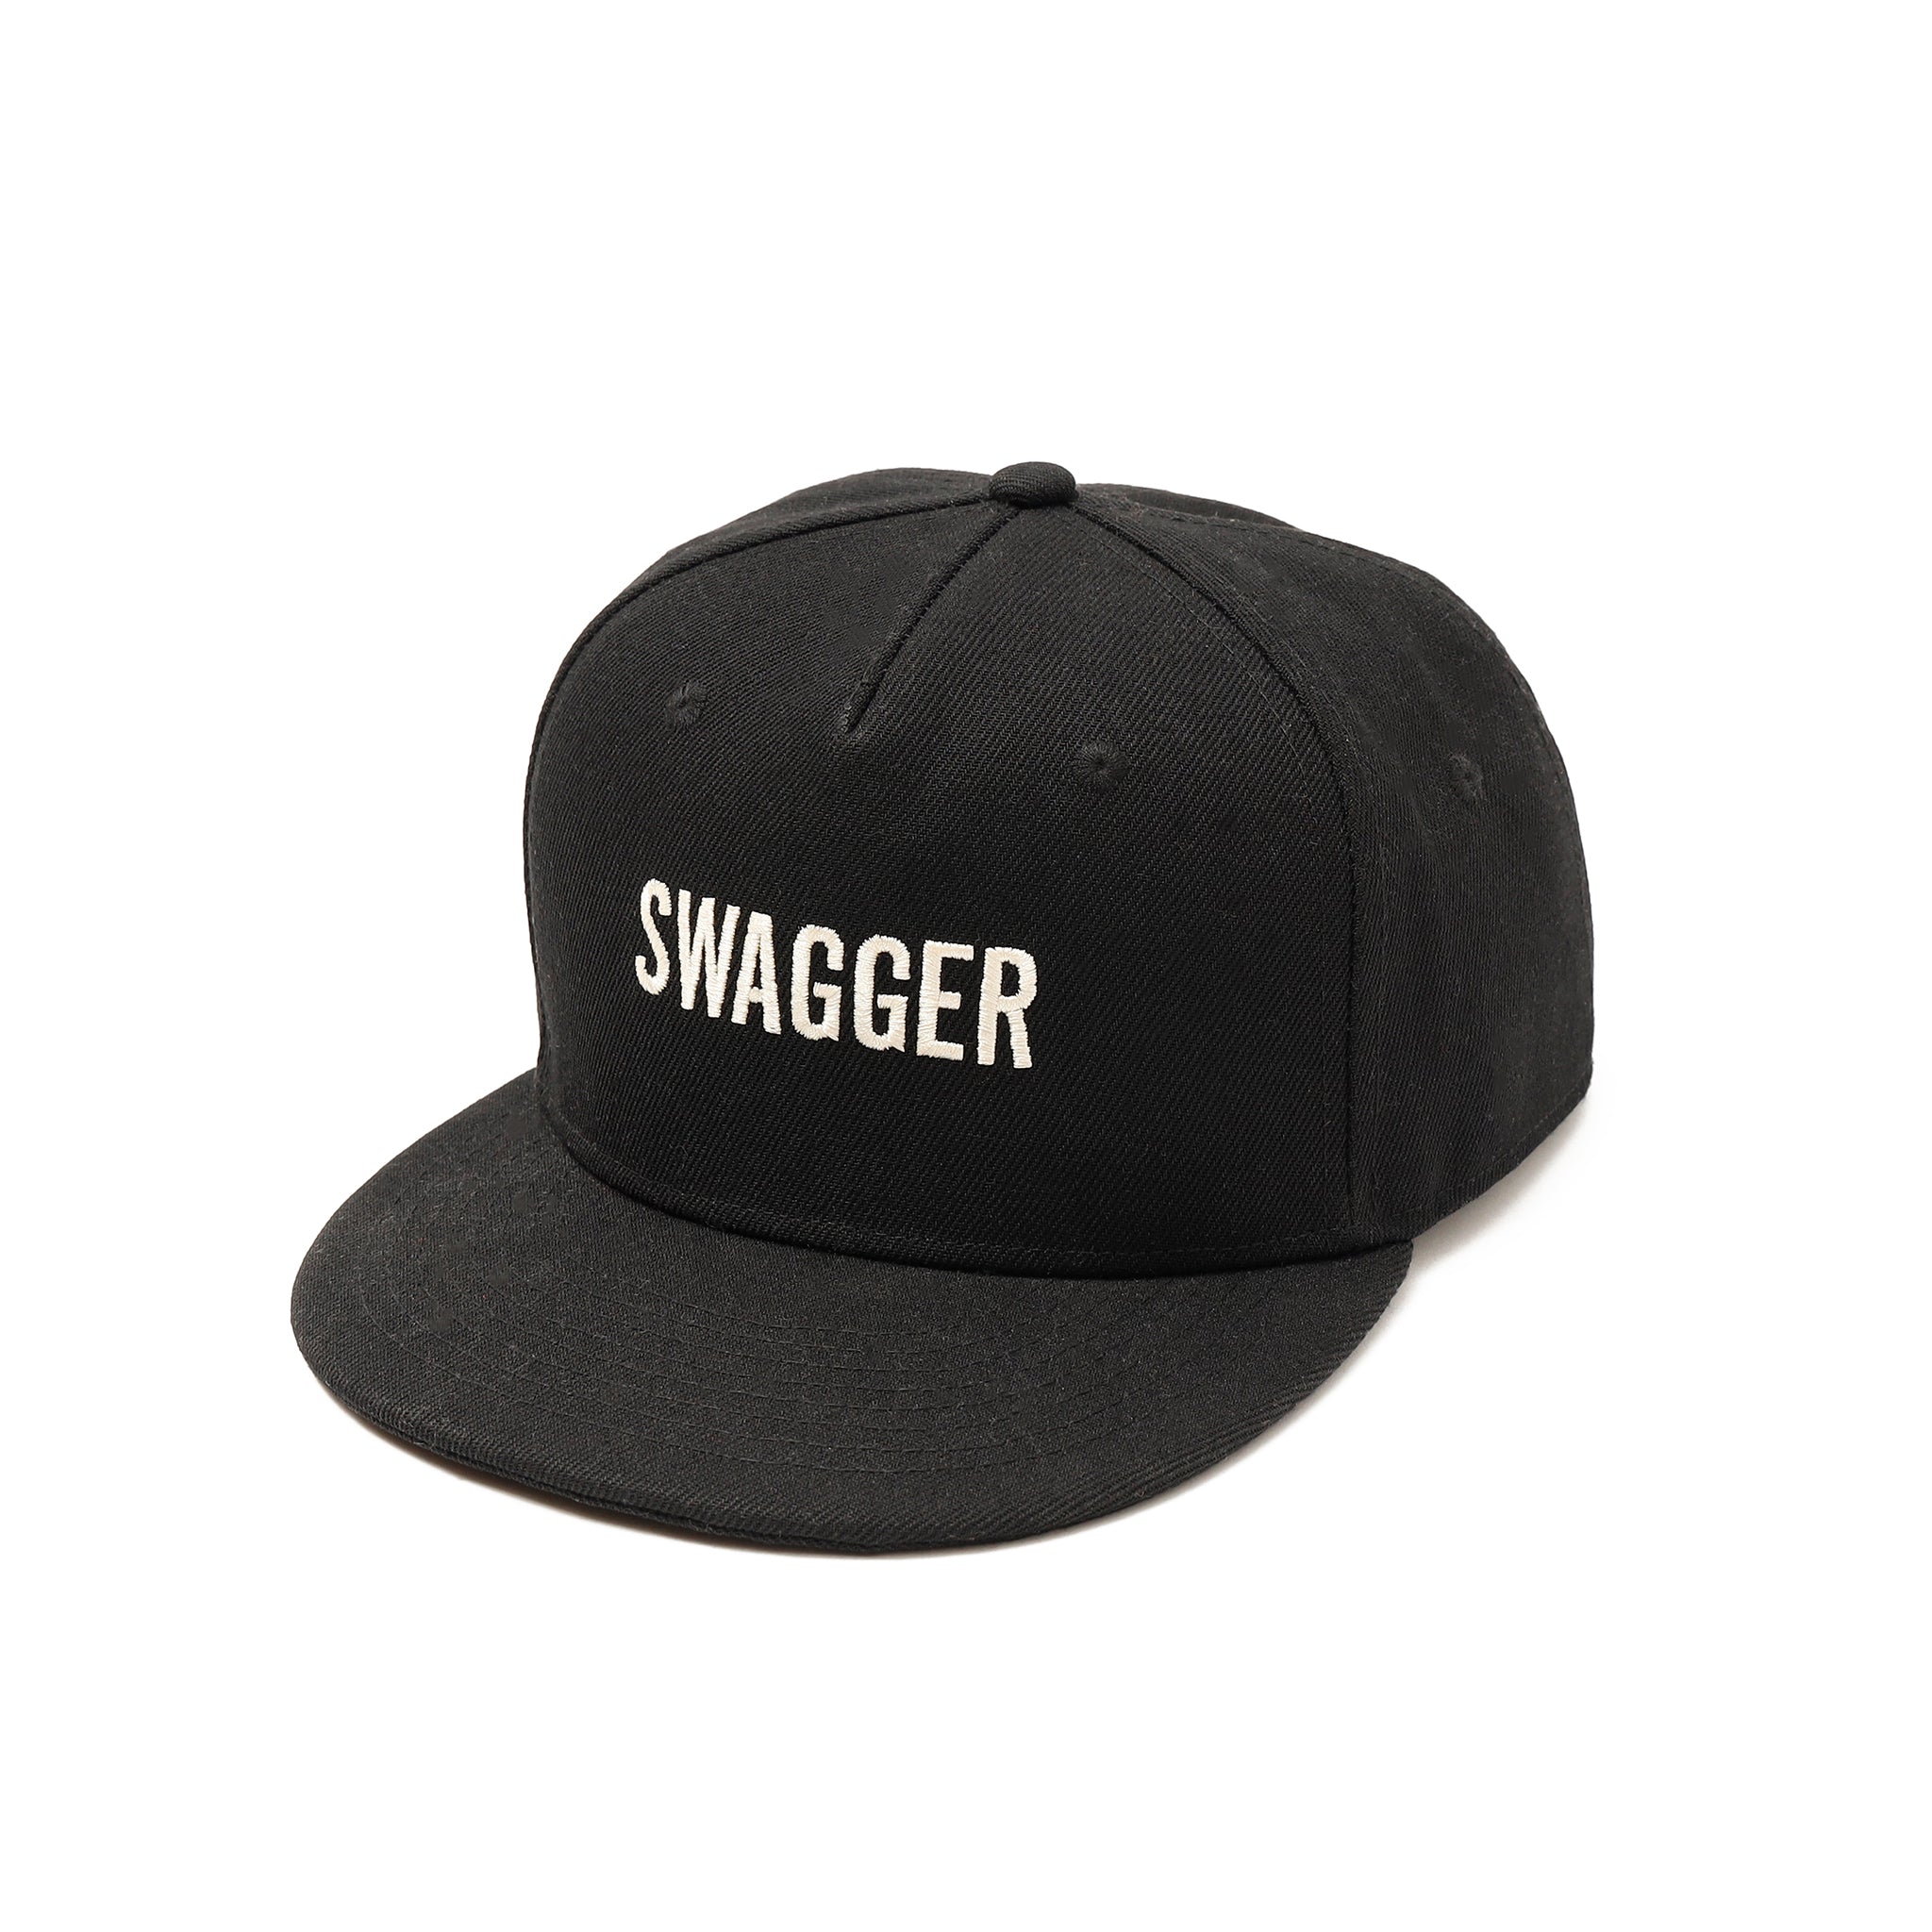 SWAGGER cap